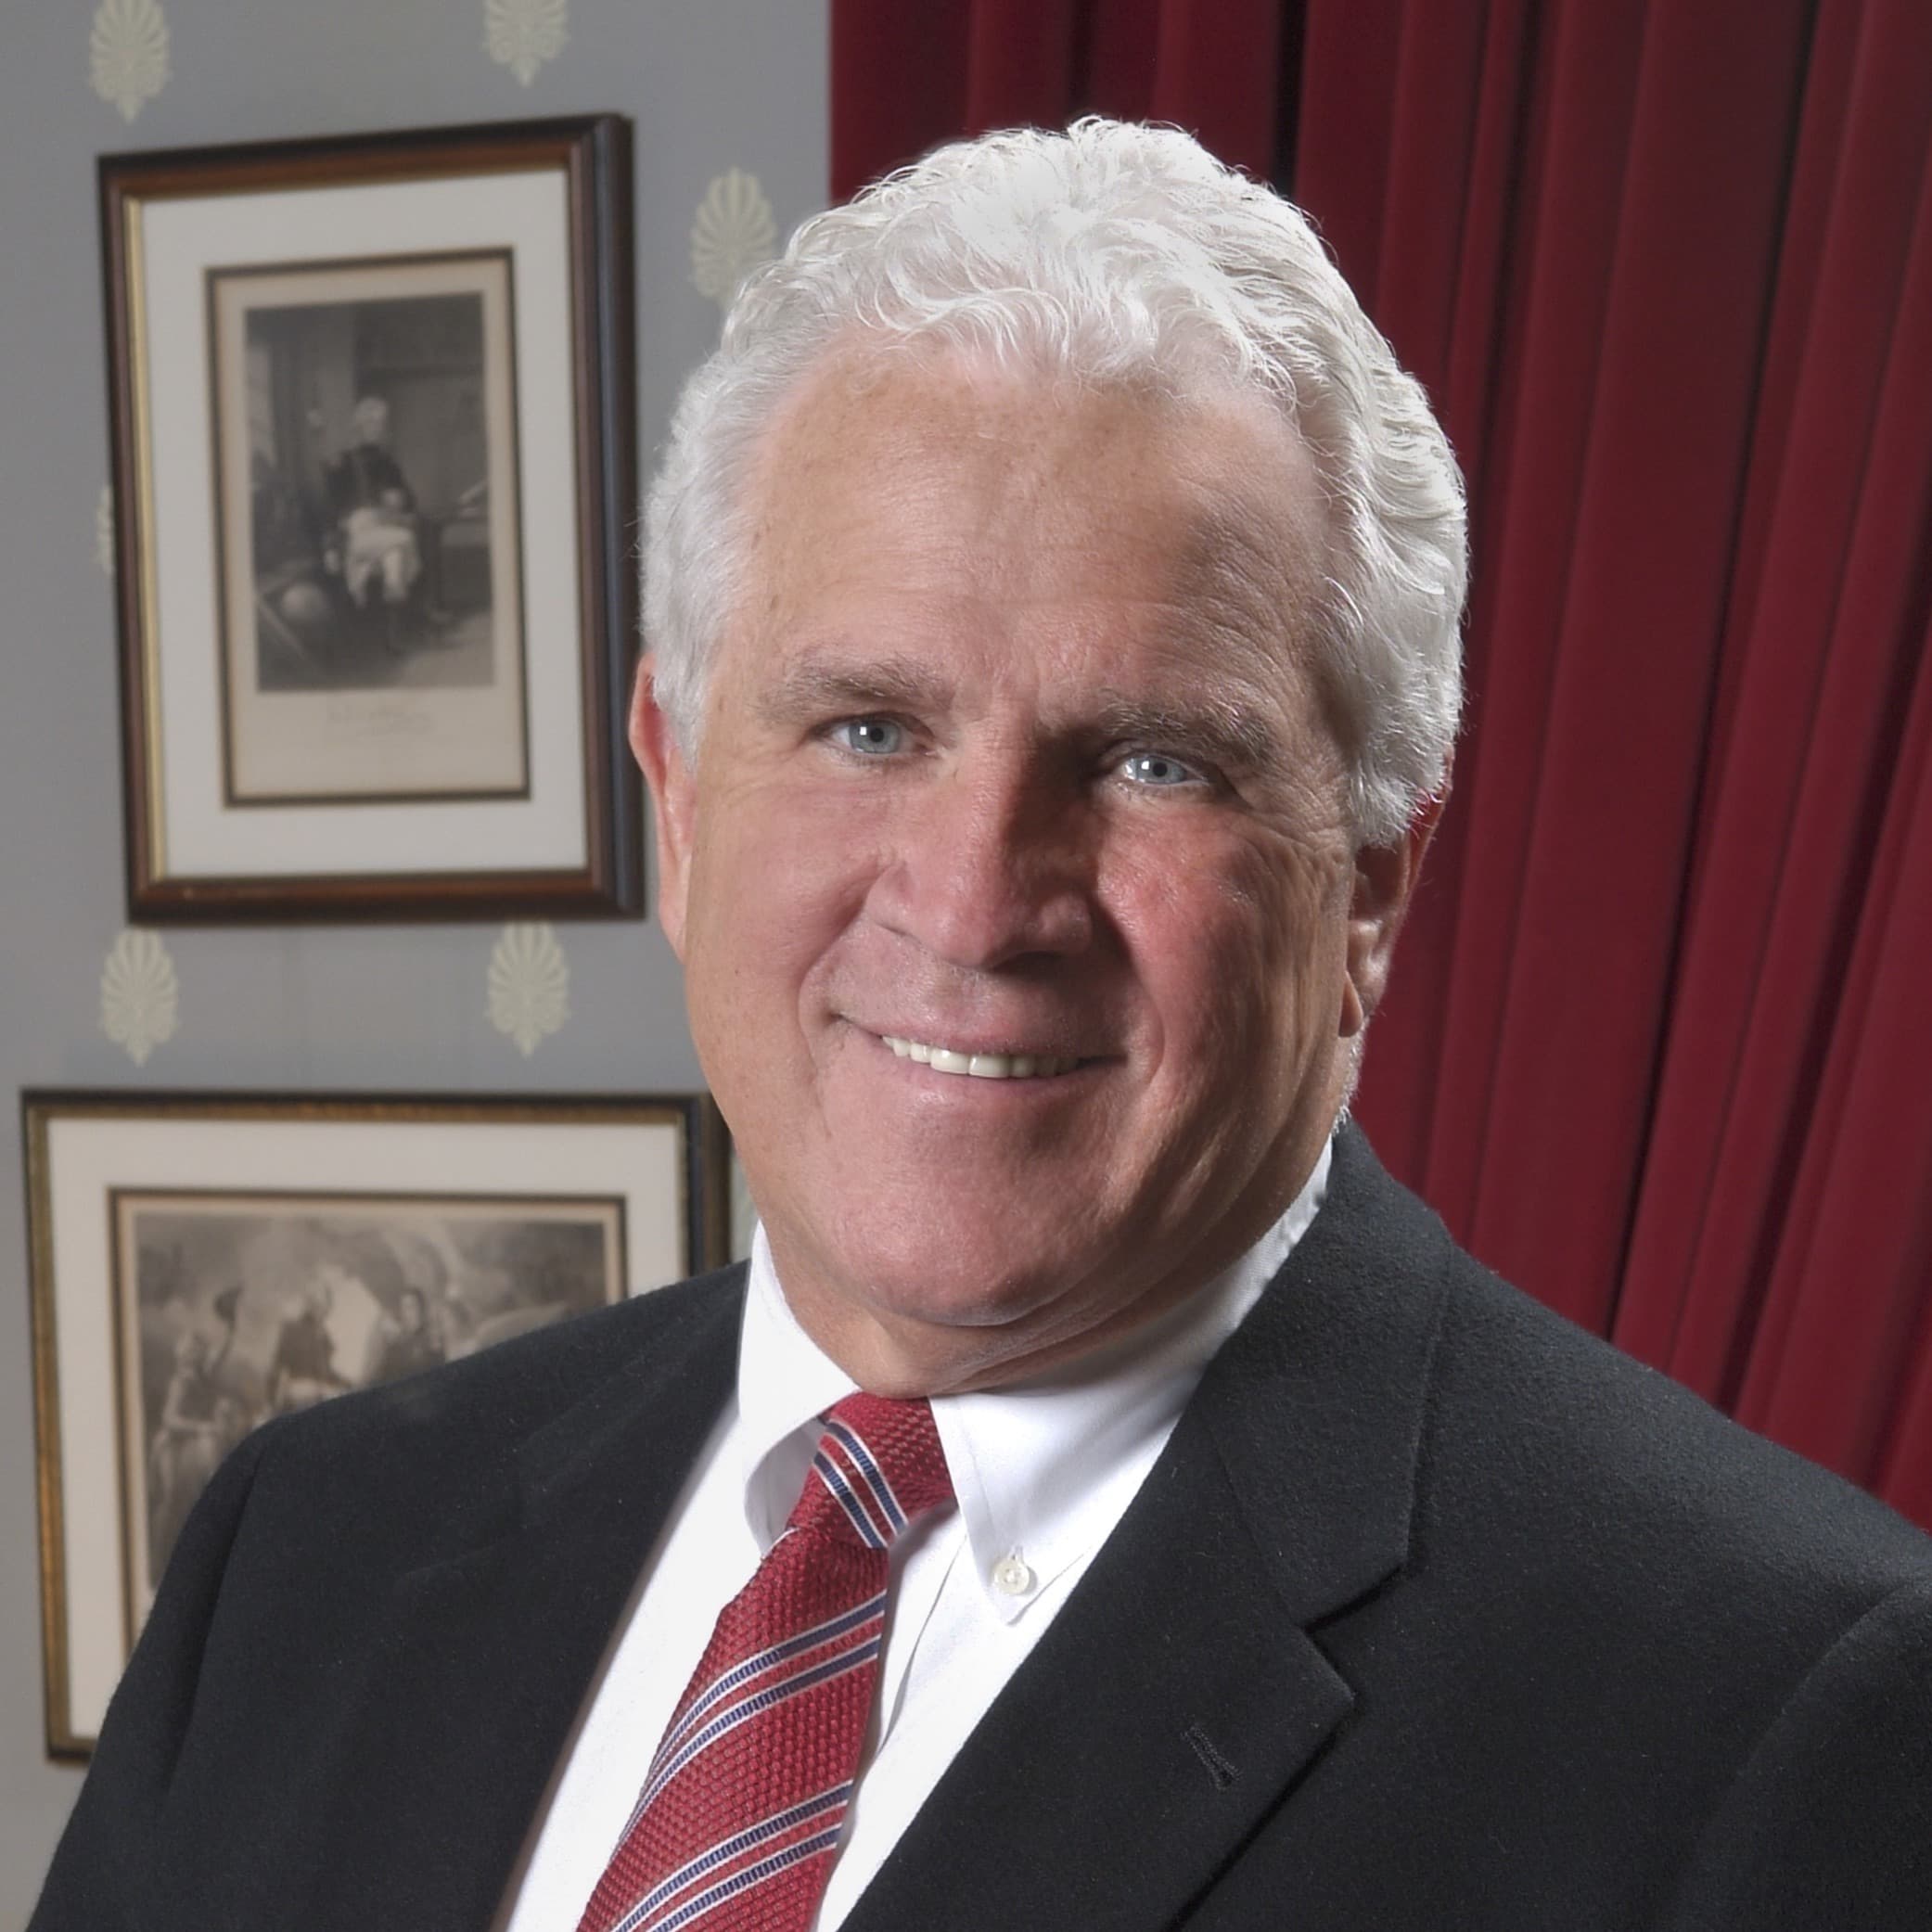 Full color headshot of Senate President Thomas V. "Mike" Miller, Jr. smiling wearing a black blazer, white dress shirt, and red striped tie against an office background. 